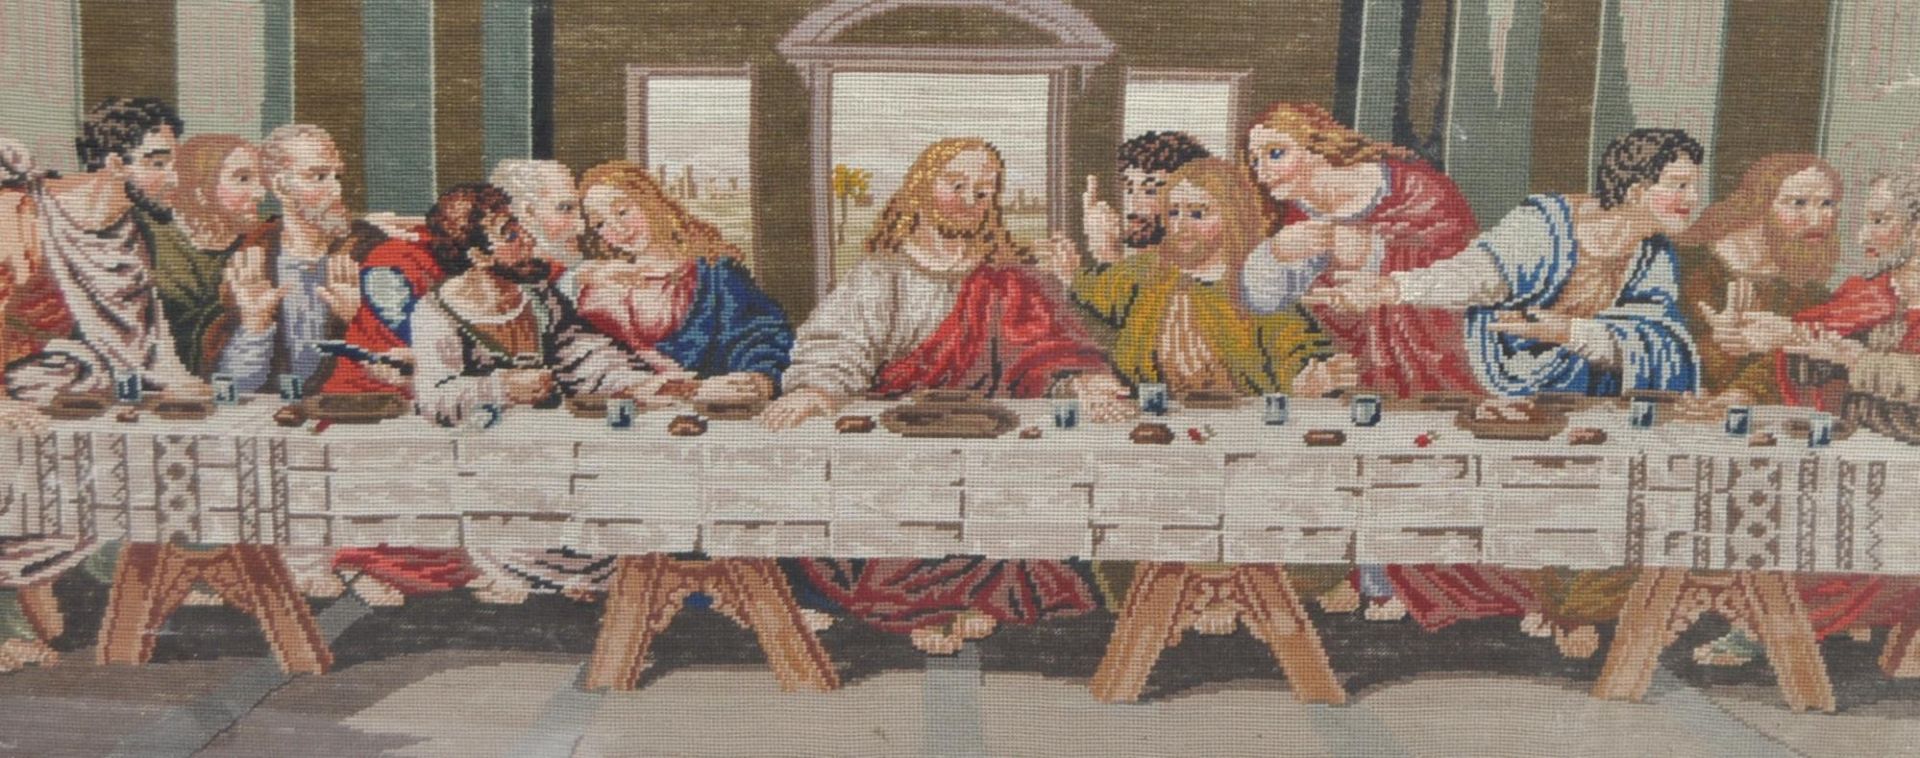 19TH CENTURY LAST SUPPER EMBROIDERED NEEDLEPOINT TAPESTRY - Image 2 of 6